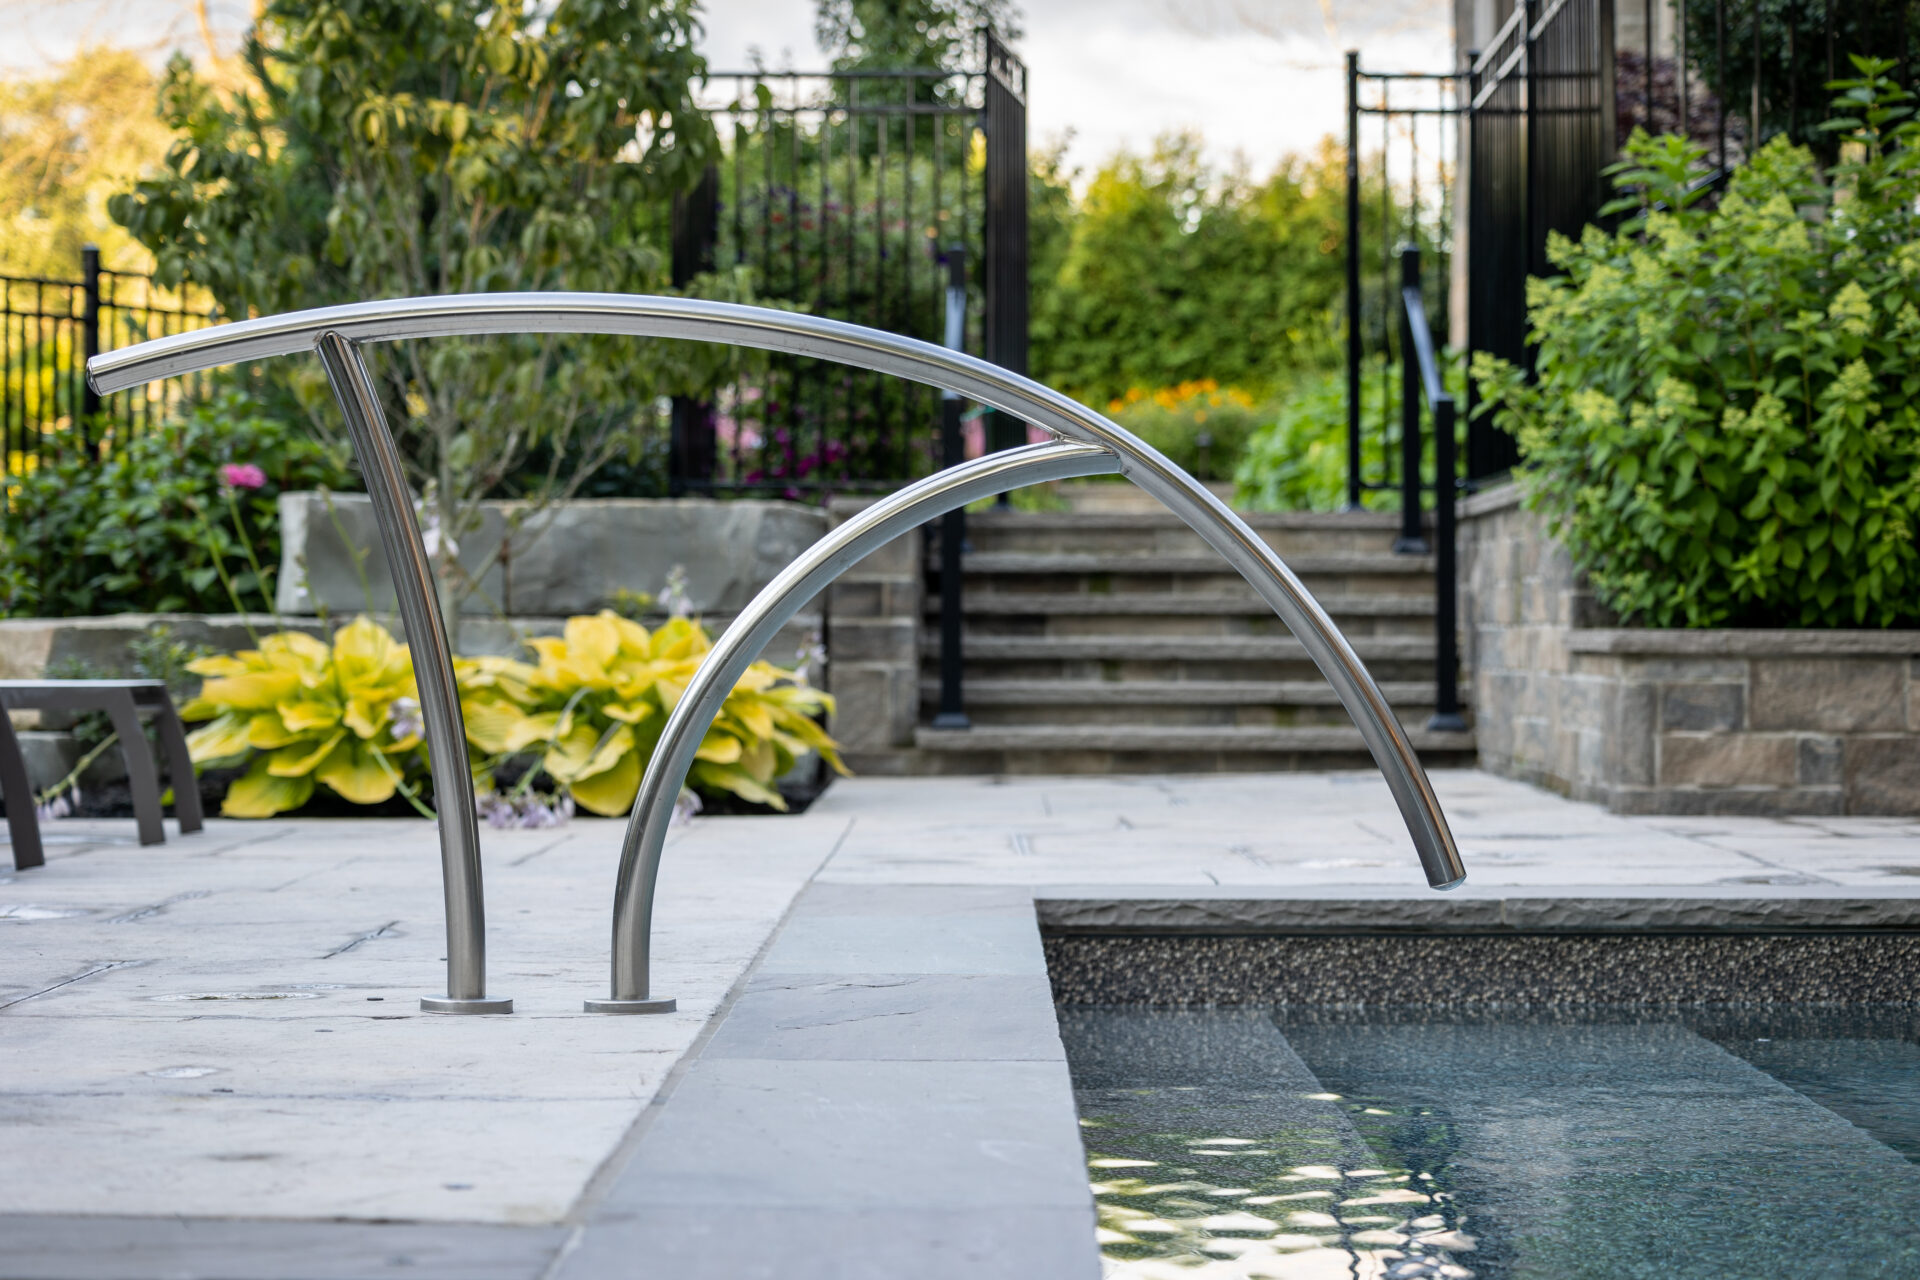 An outdoor pool with sleek, curved stainless steel handrails, surrounded by a paved area, plants, and stairs leading to a gated entrance.